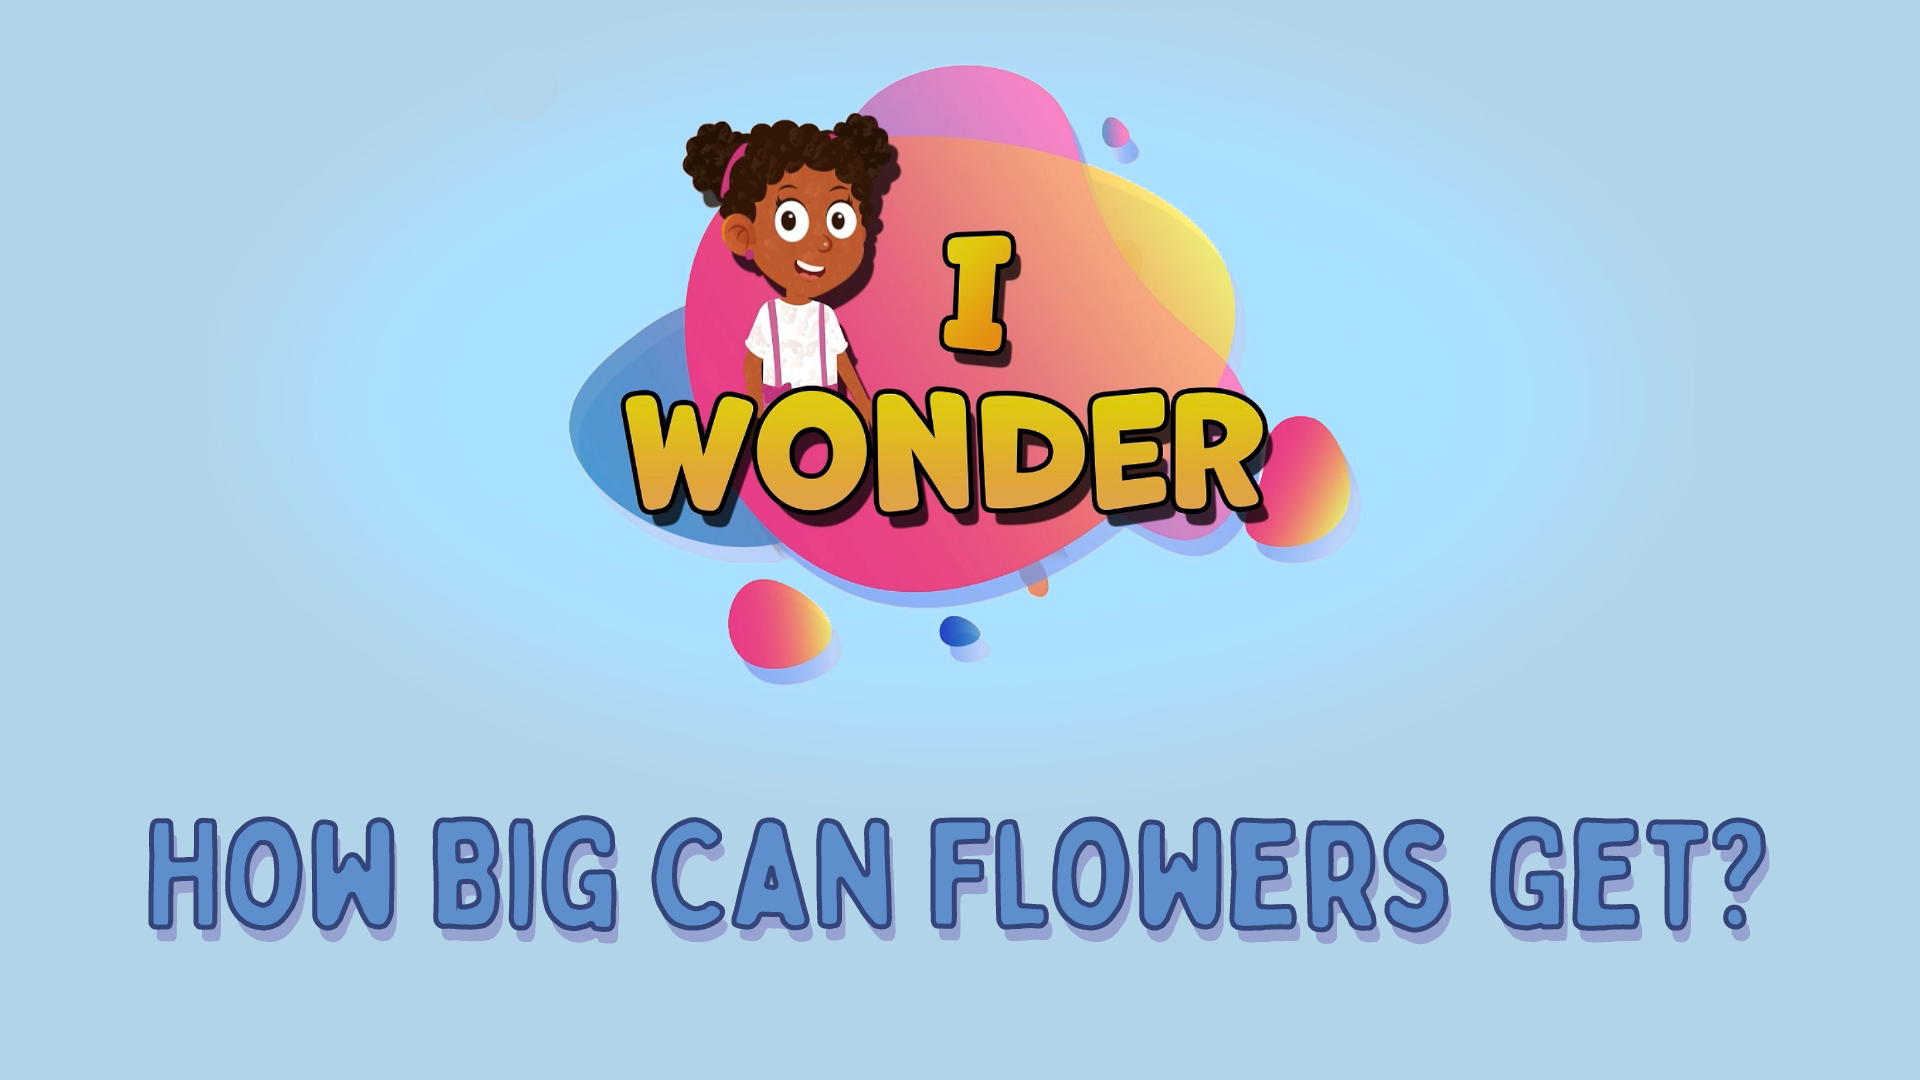 How Big Can Flowers Get?